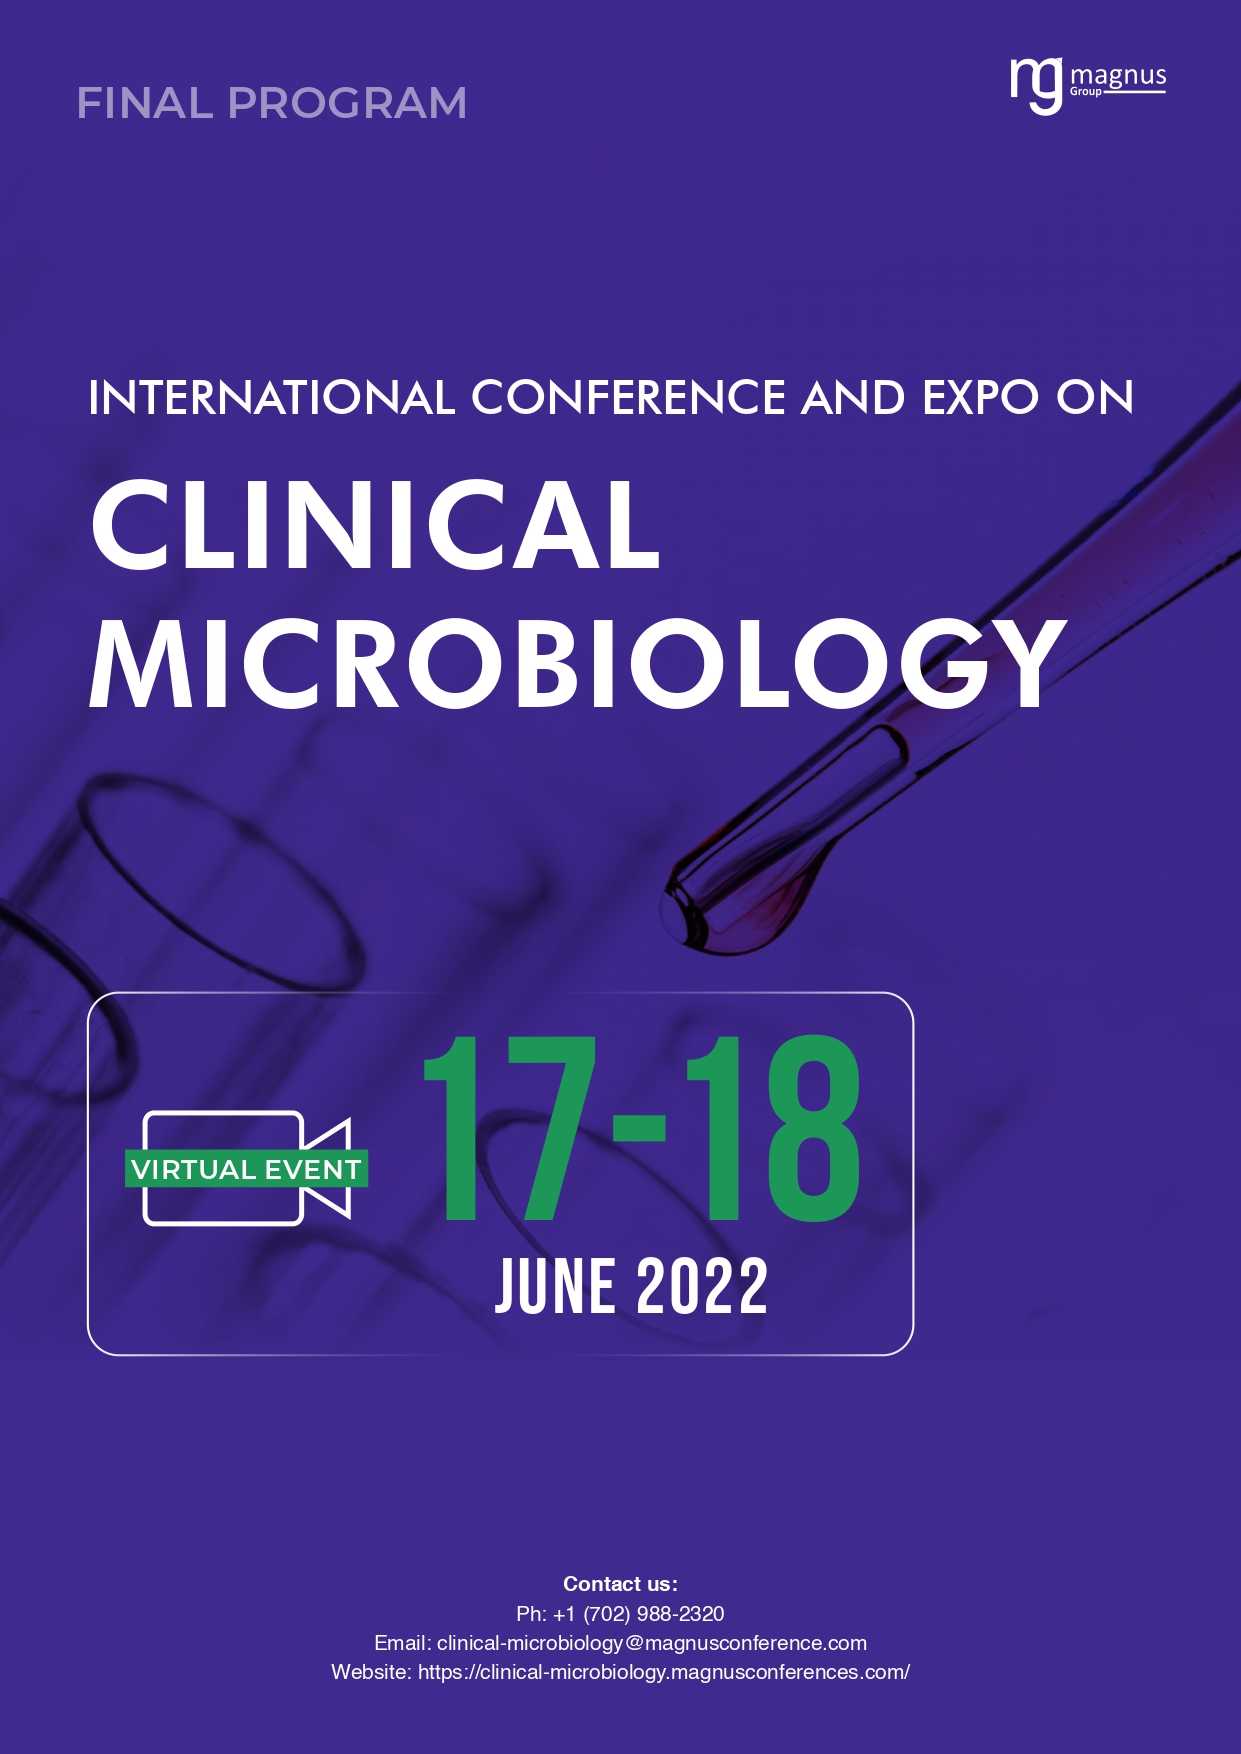 International Conference and Expo on Clinical Microbiology | Online Event Program